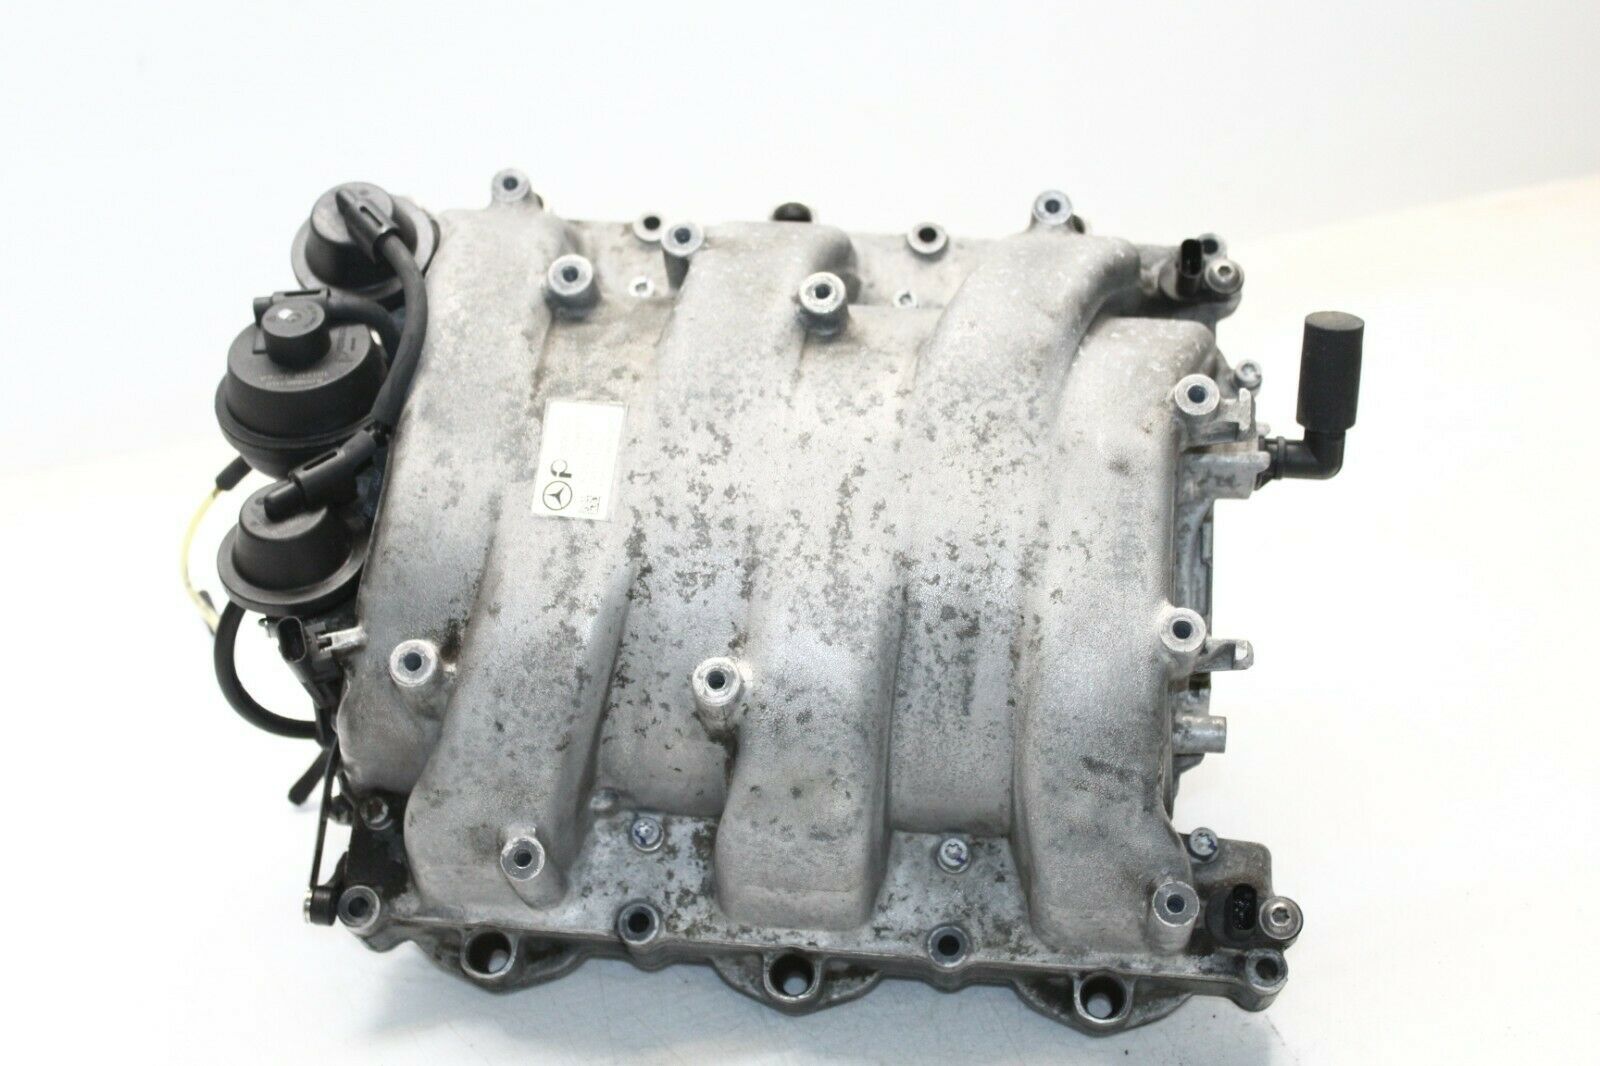 Primary image for 2007-2011 MERCEDES W211 E350 ML350 V6 3.5L ENGINE INTAKE MANIFOLD P5250